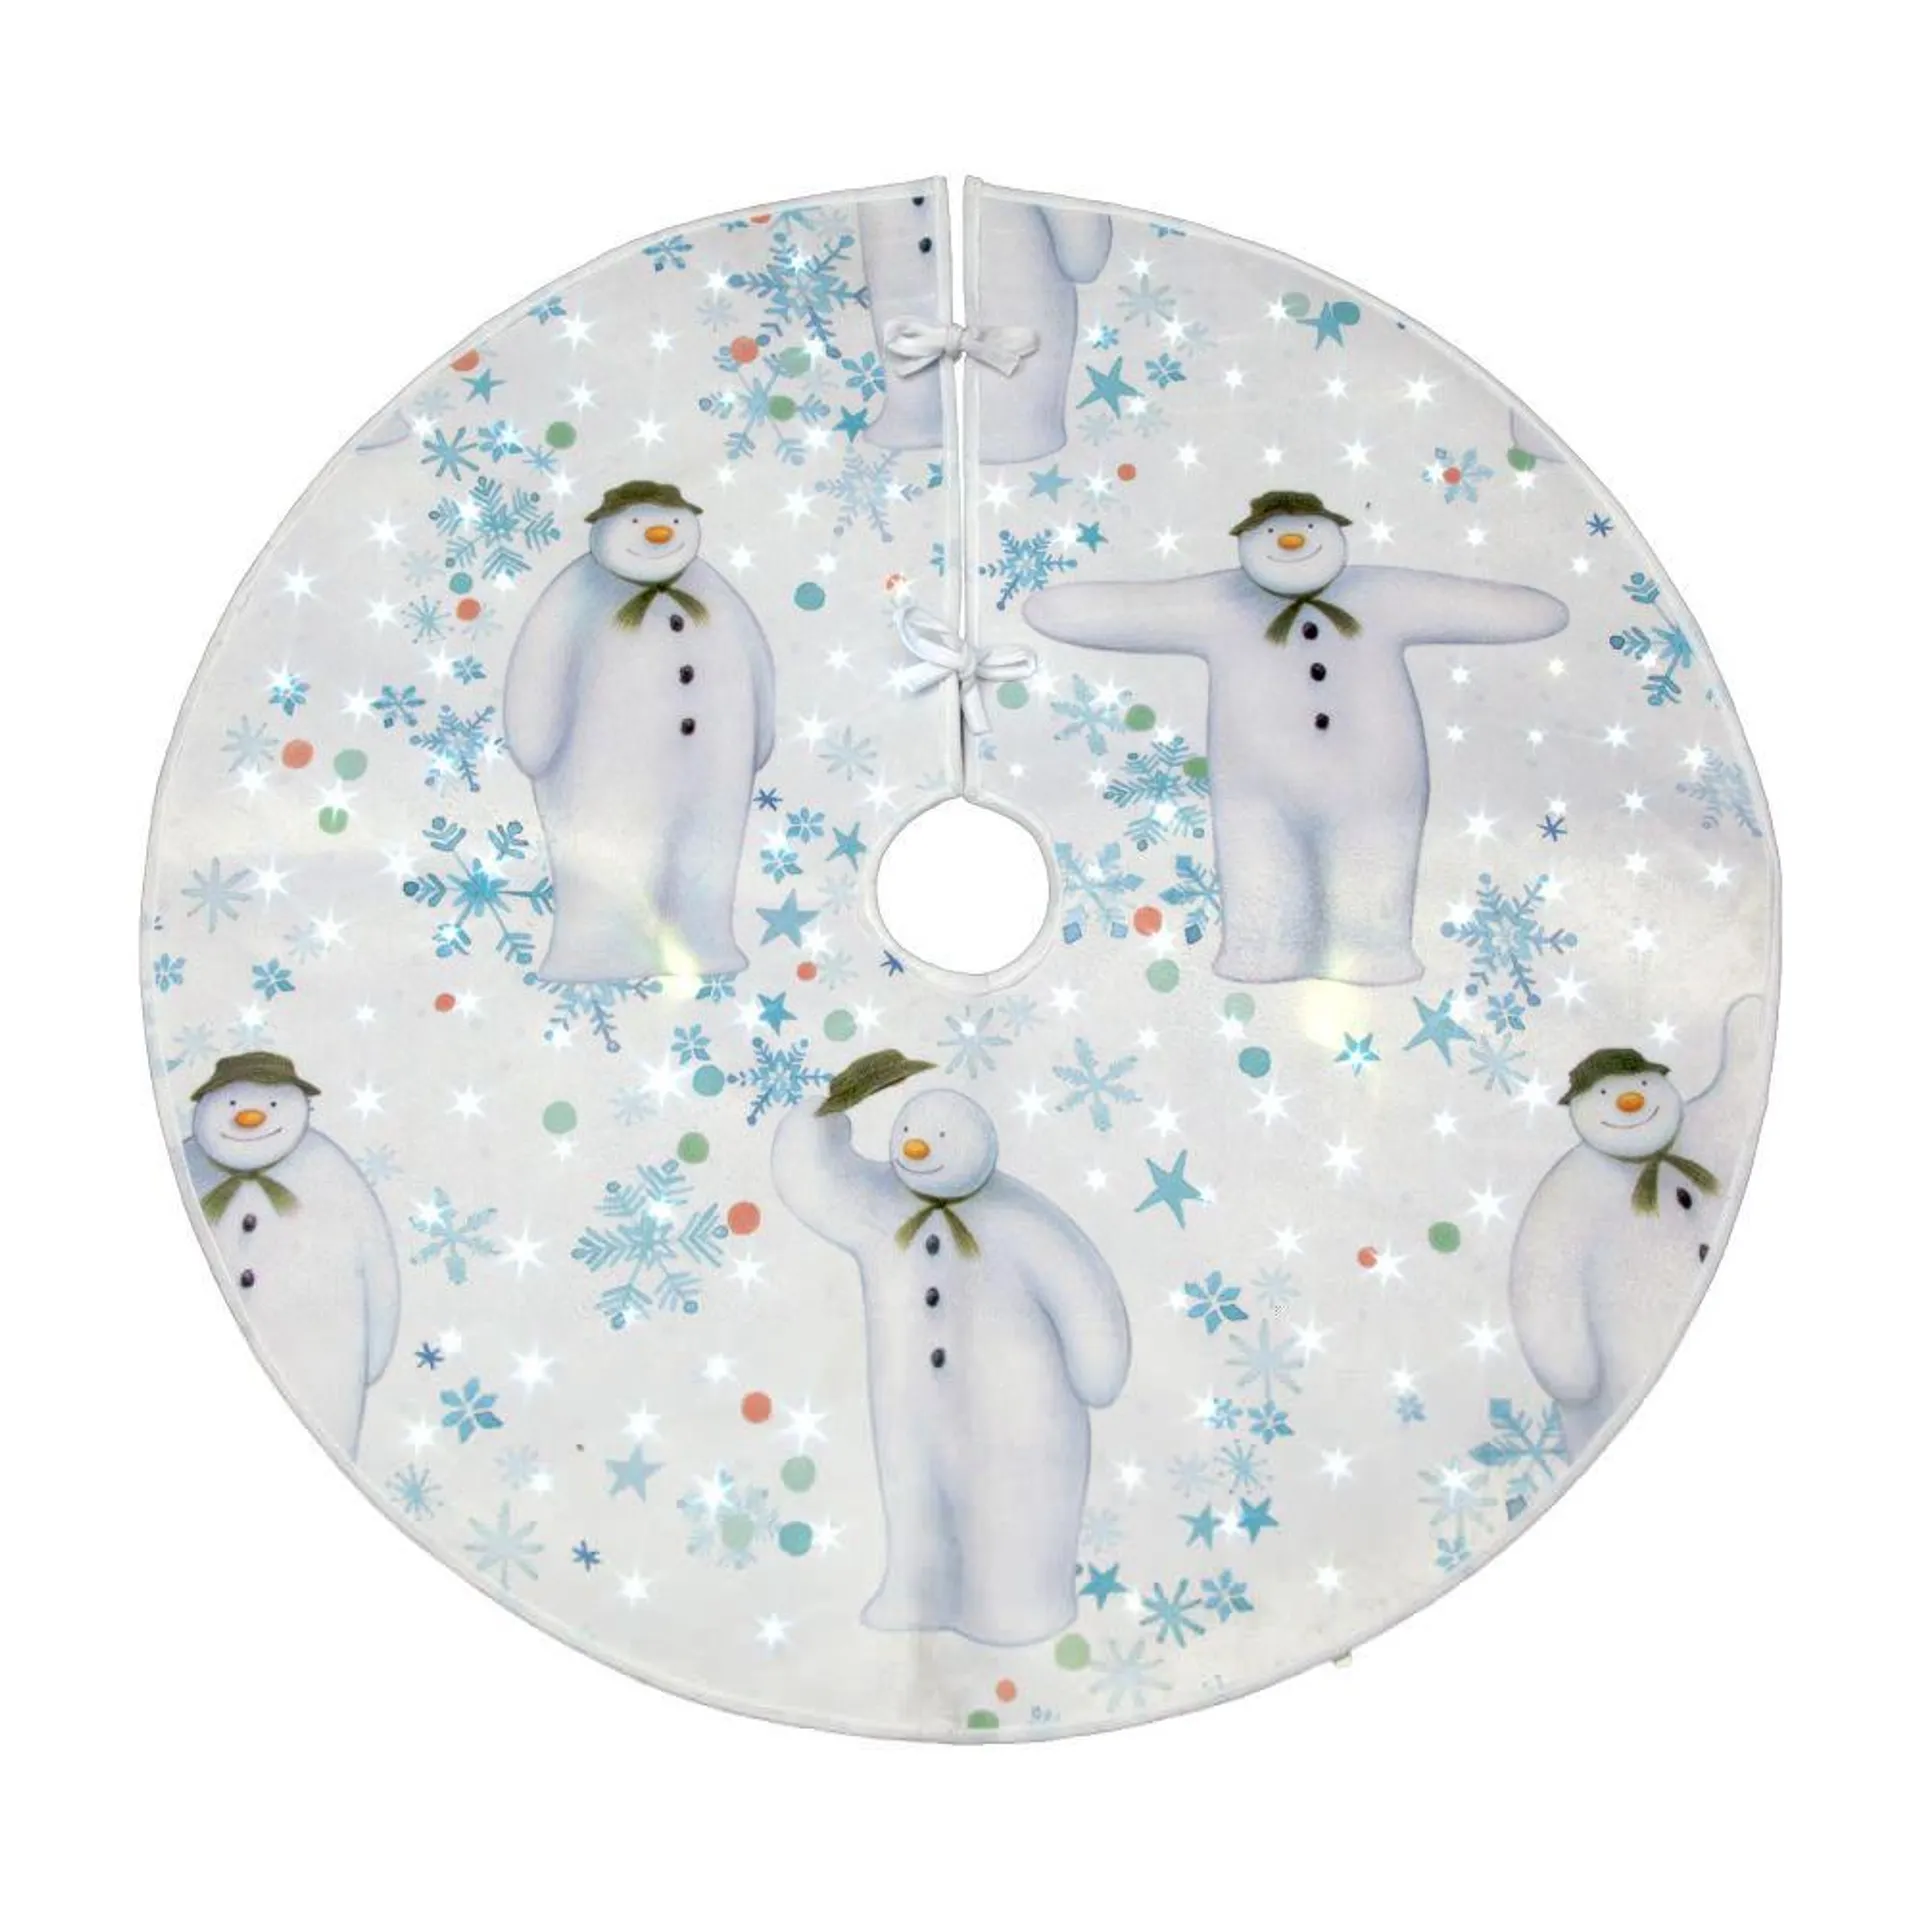 The Snowman Battery Operated Fibre Optic 90cm Tree Skirt